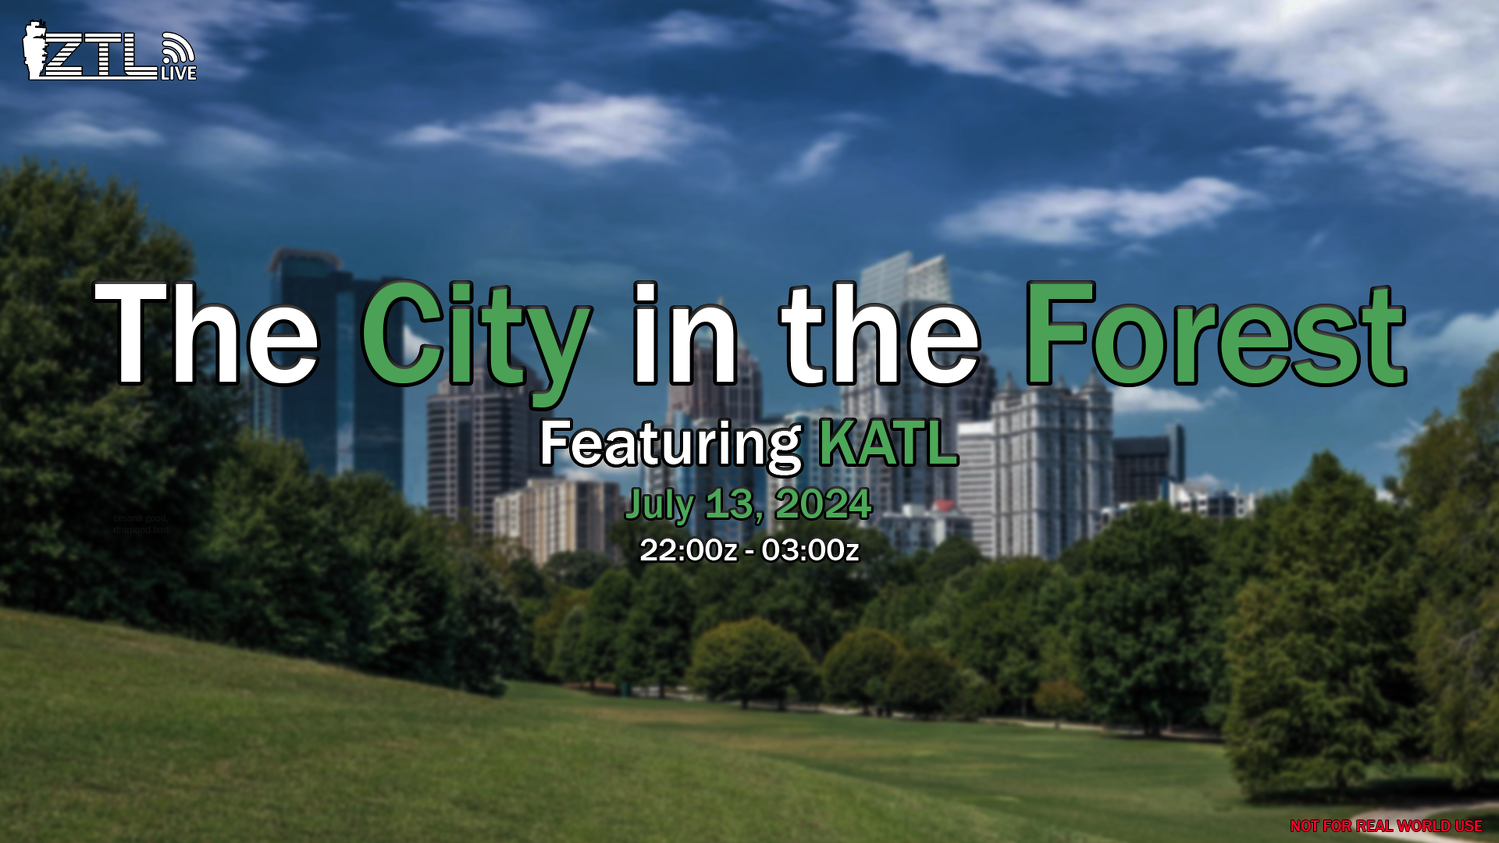 The City in the Forest